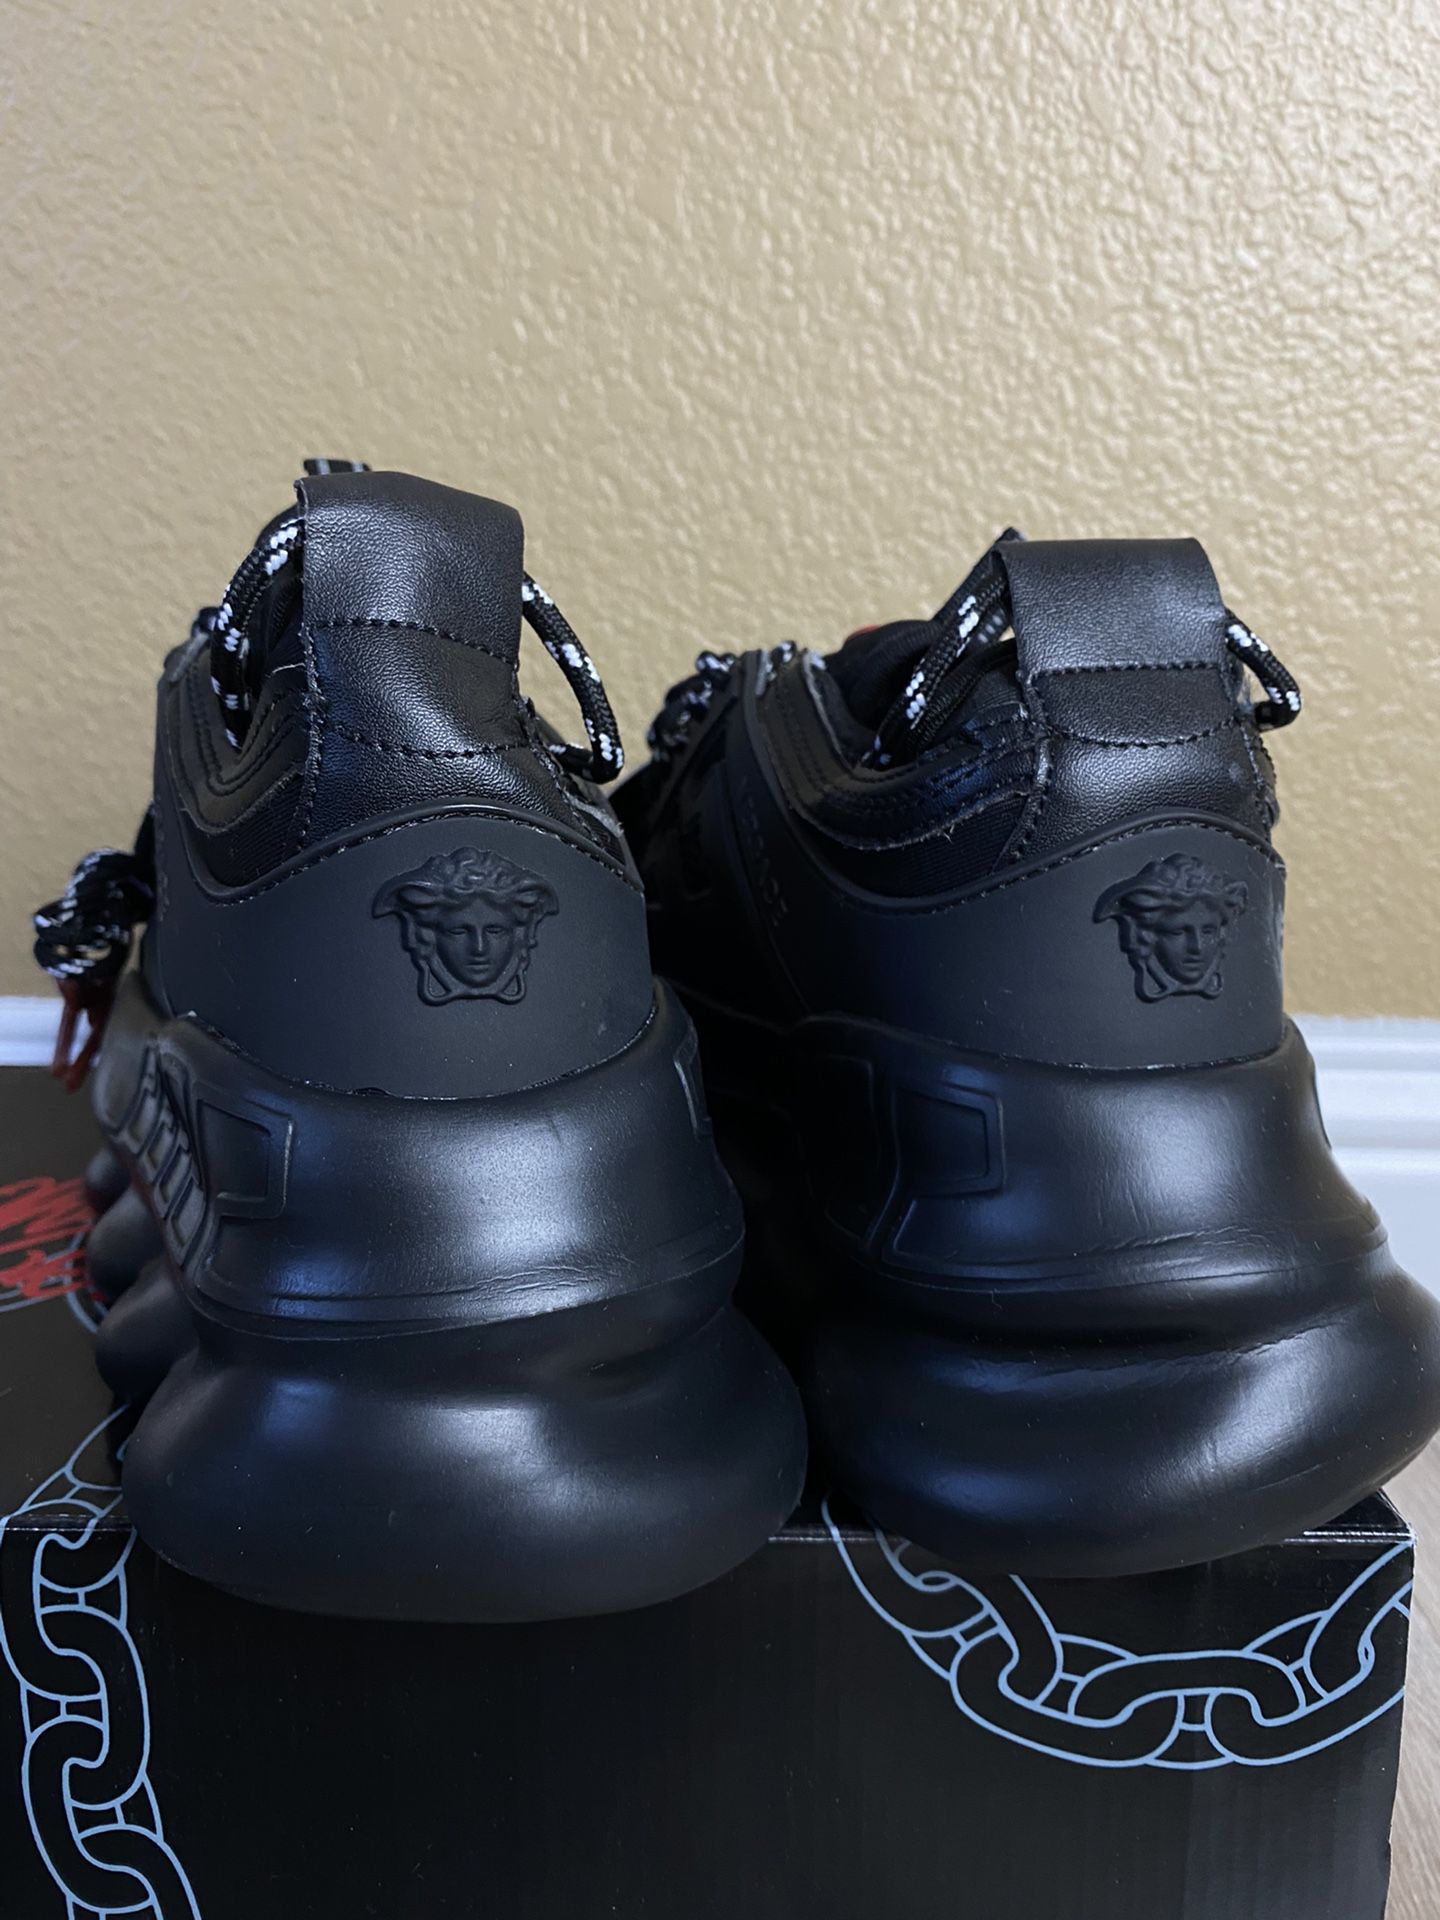 Versace Chain Reaction Unboxing & On Feet Detailed Review 